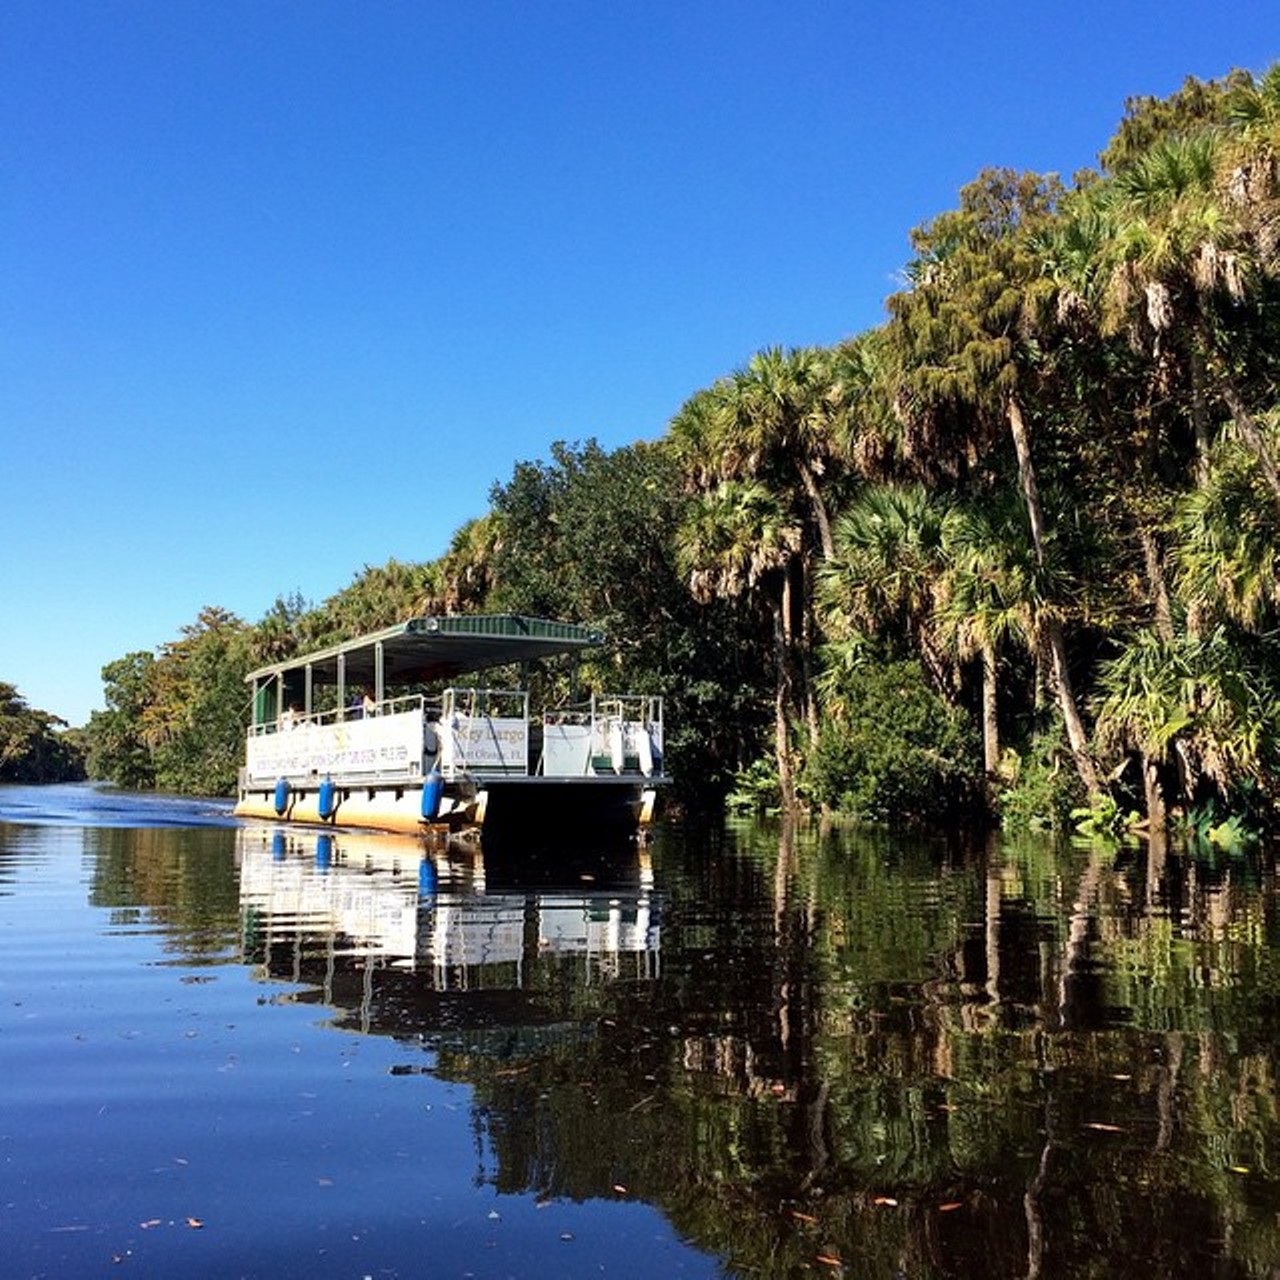  Cracker Creek Boat Tours 
1795 Taylor Road, Port Orange, 386-304-0778, $12-$50
Cracker Creek offers a variety of different tours, from a one-hour Eco-History Tour to a 2-hour to a sunset cruise with alcohol and hors d&#146;oeuvres. If you choose their one-hour Eco-History Tour, which is the cheapest, you&#146;ll be led down Spruce Creek by one of their guides featuring an interactive narrative of the history and ecology of the area. At the end of the tour, you&#146;ll get a demonstration on whip cracking and how the early Florida cracker cowboys used it. Tour leaves at 2 p.m. on Friday, Saturday, and Sunday. 
Photo via thislittletown/Instagram